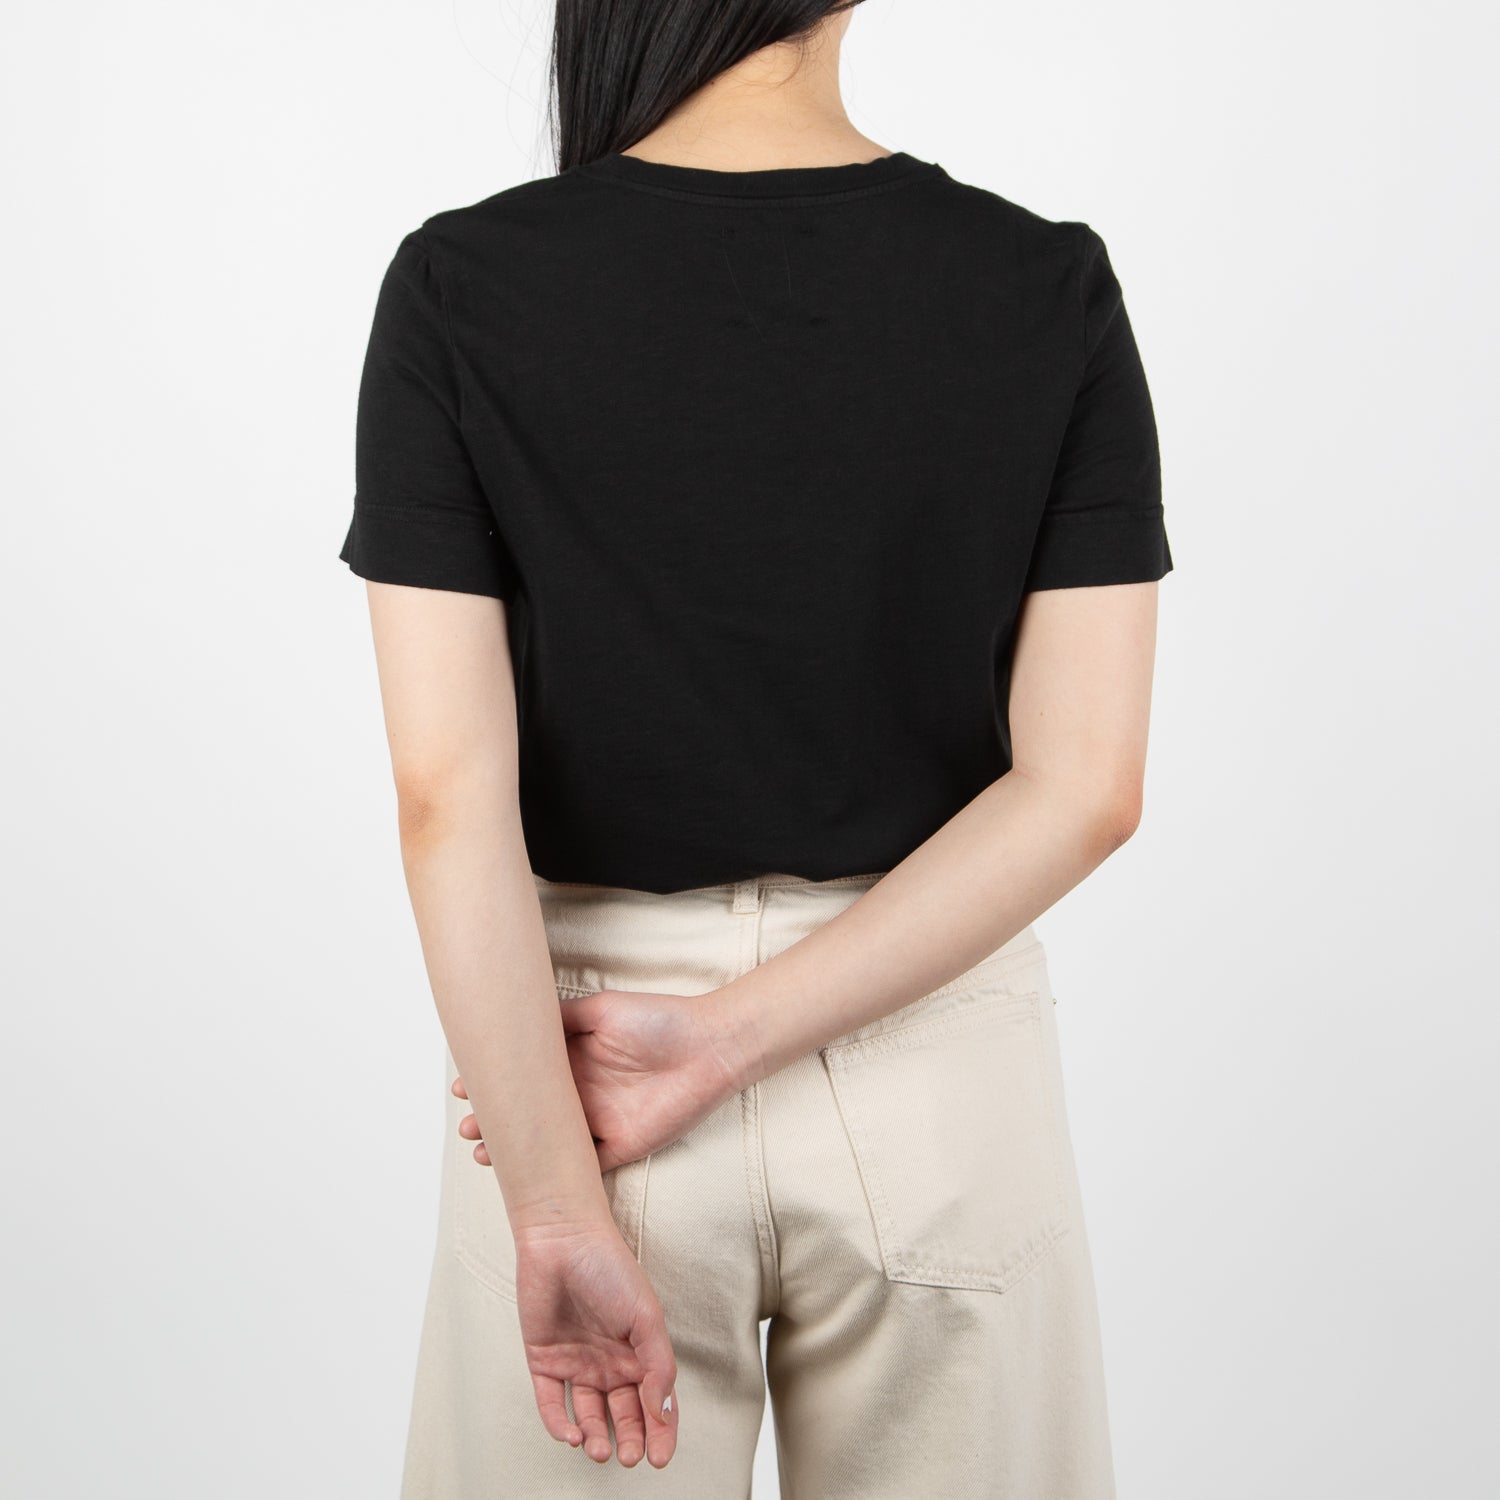 black cotton shirt with phrase by Secret Location